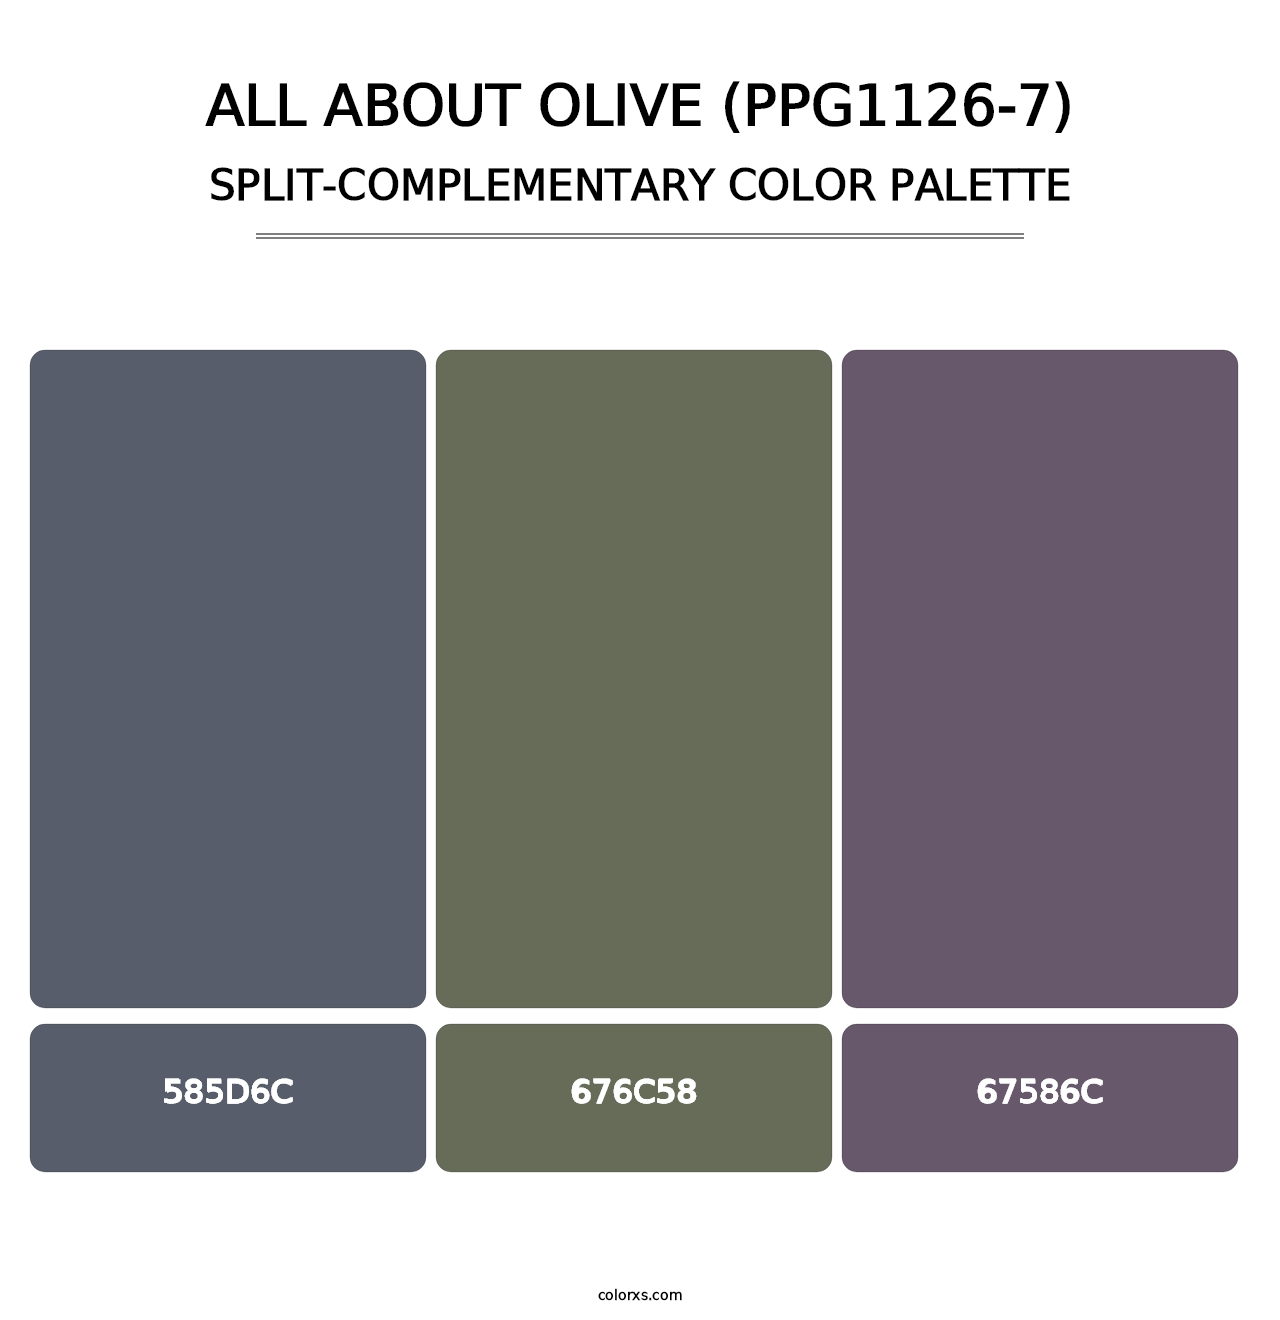 All About Olive (PPG1126-7) - Split-Complementary Color Palette